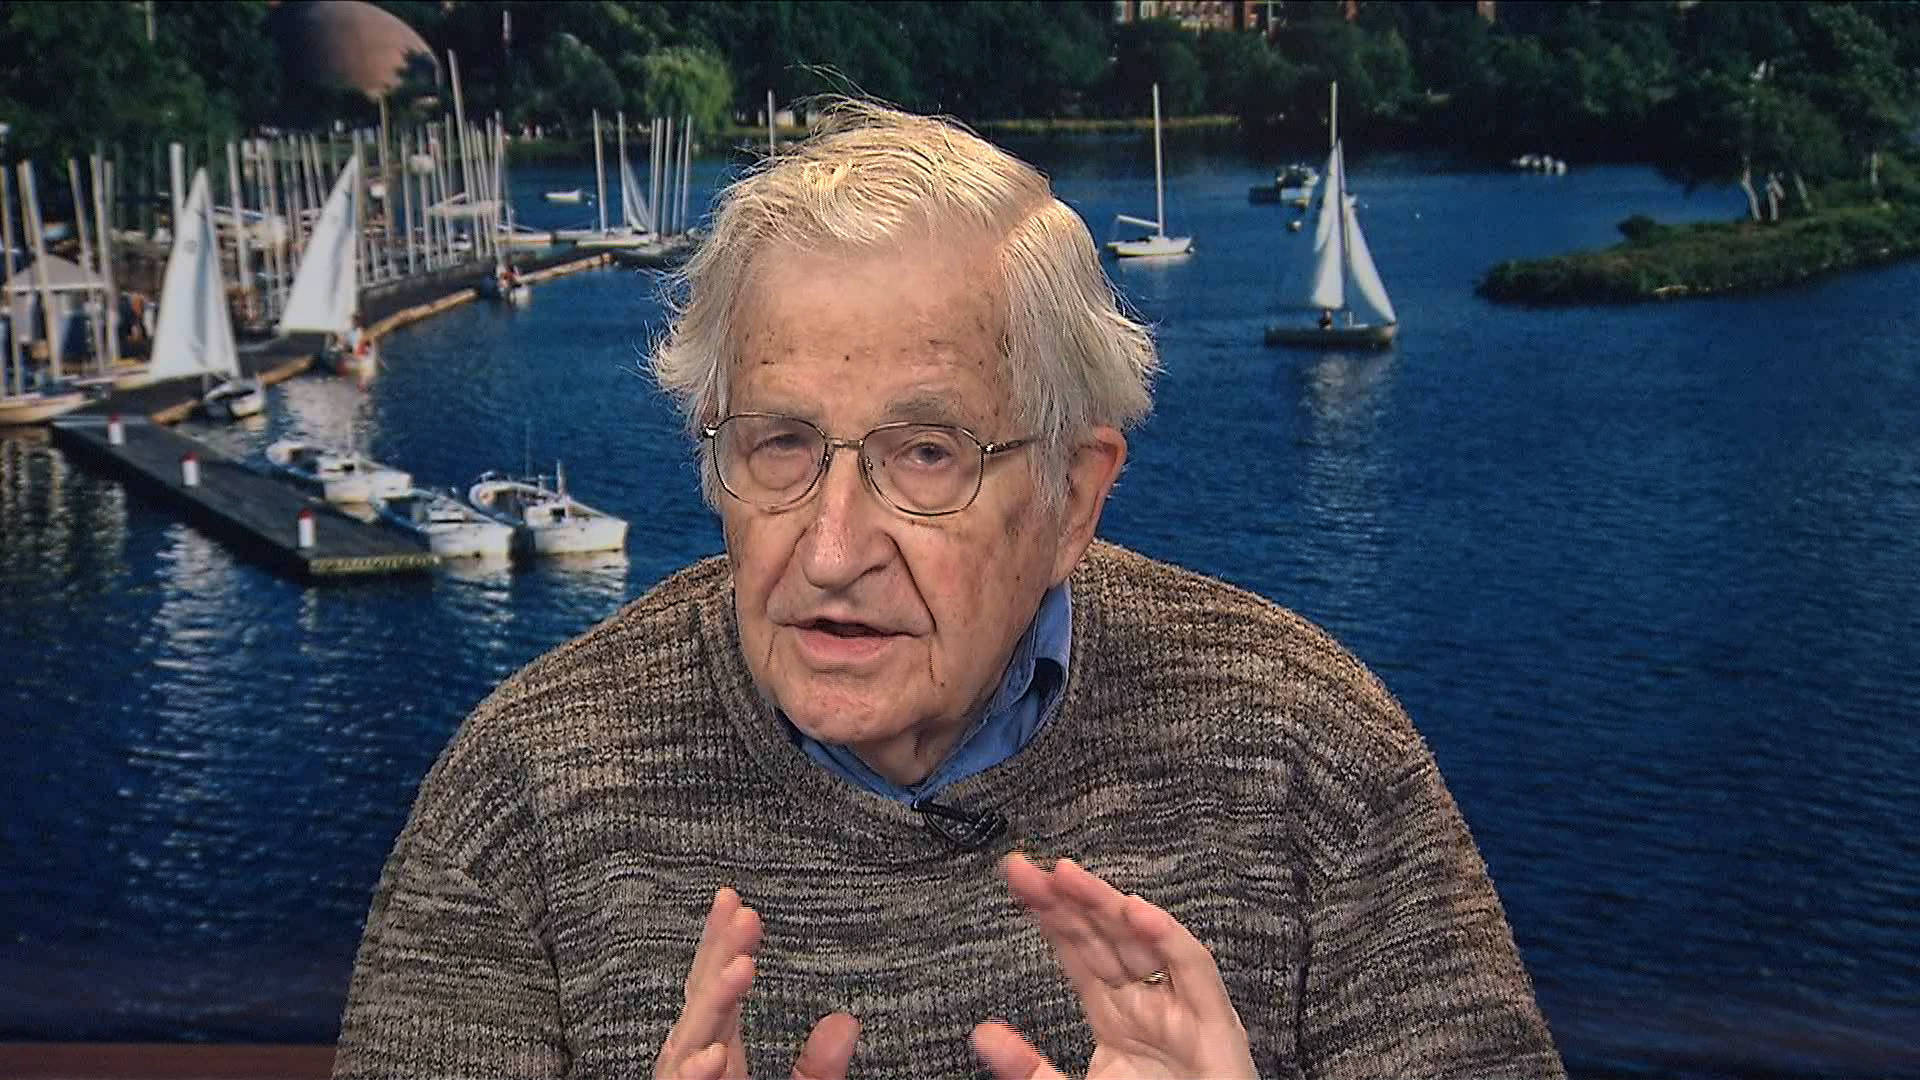 Noam Chomsky: Brazil’s President Dilma Rousseff “Impeached by a Gang of Thieves ...